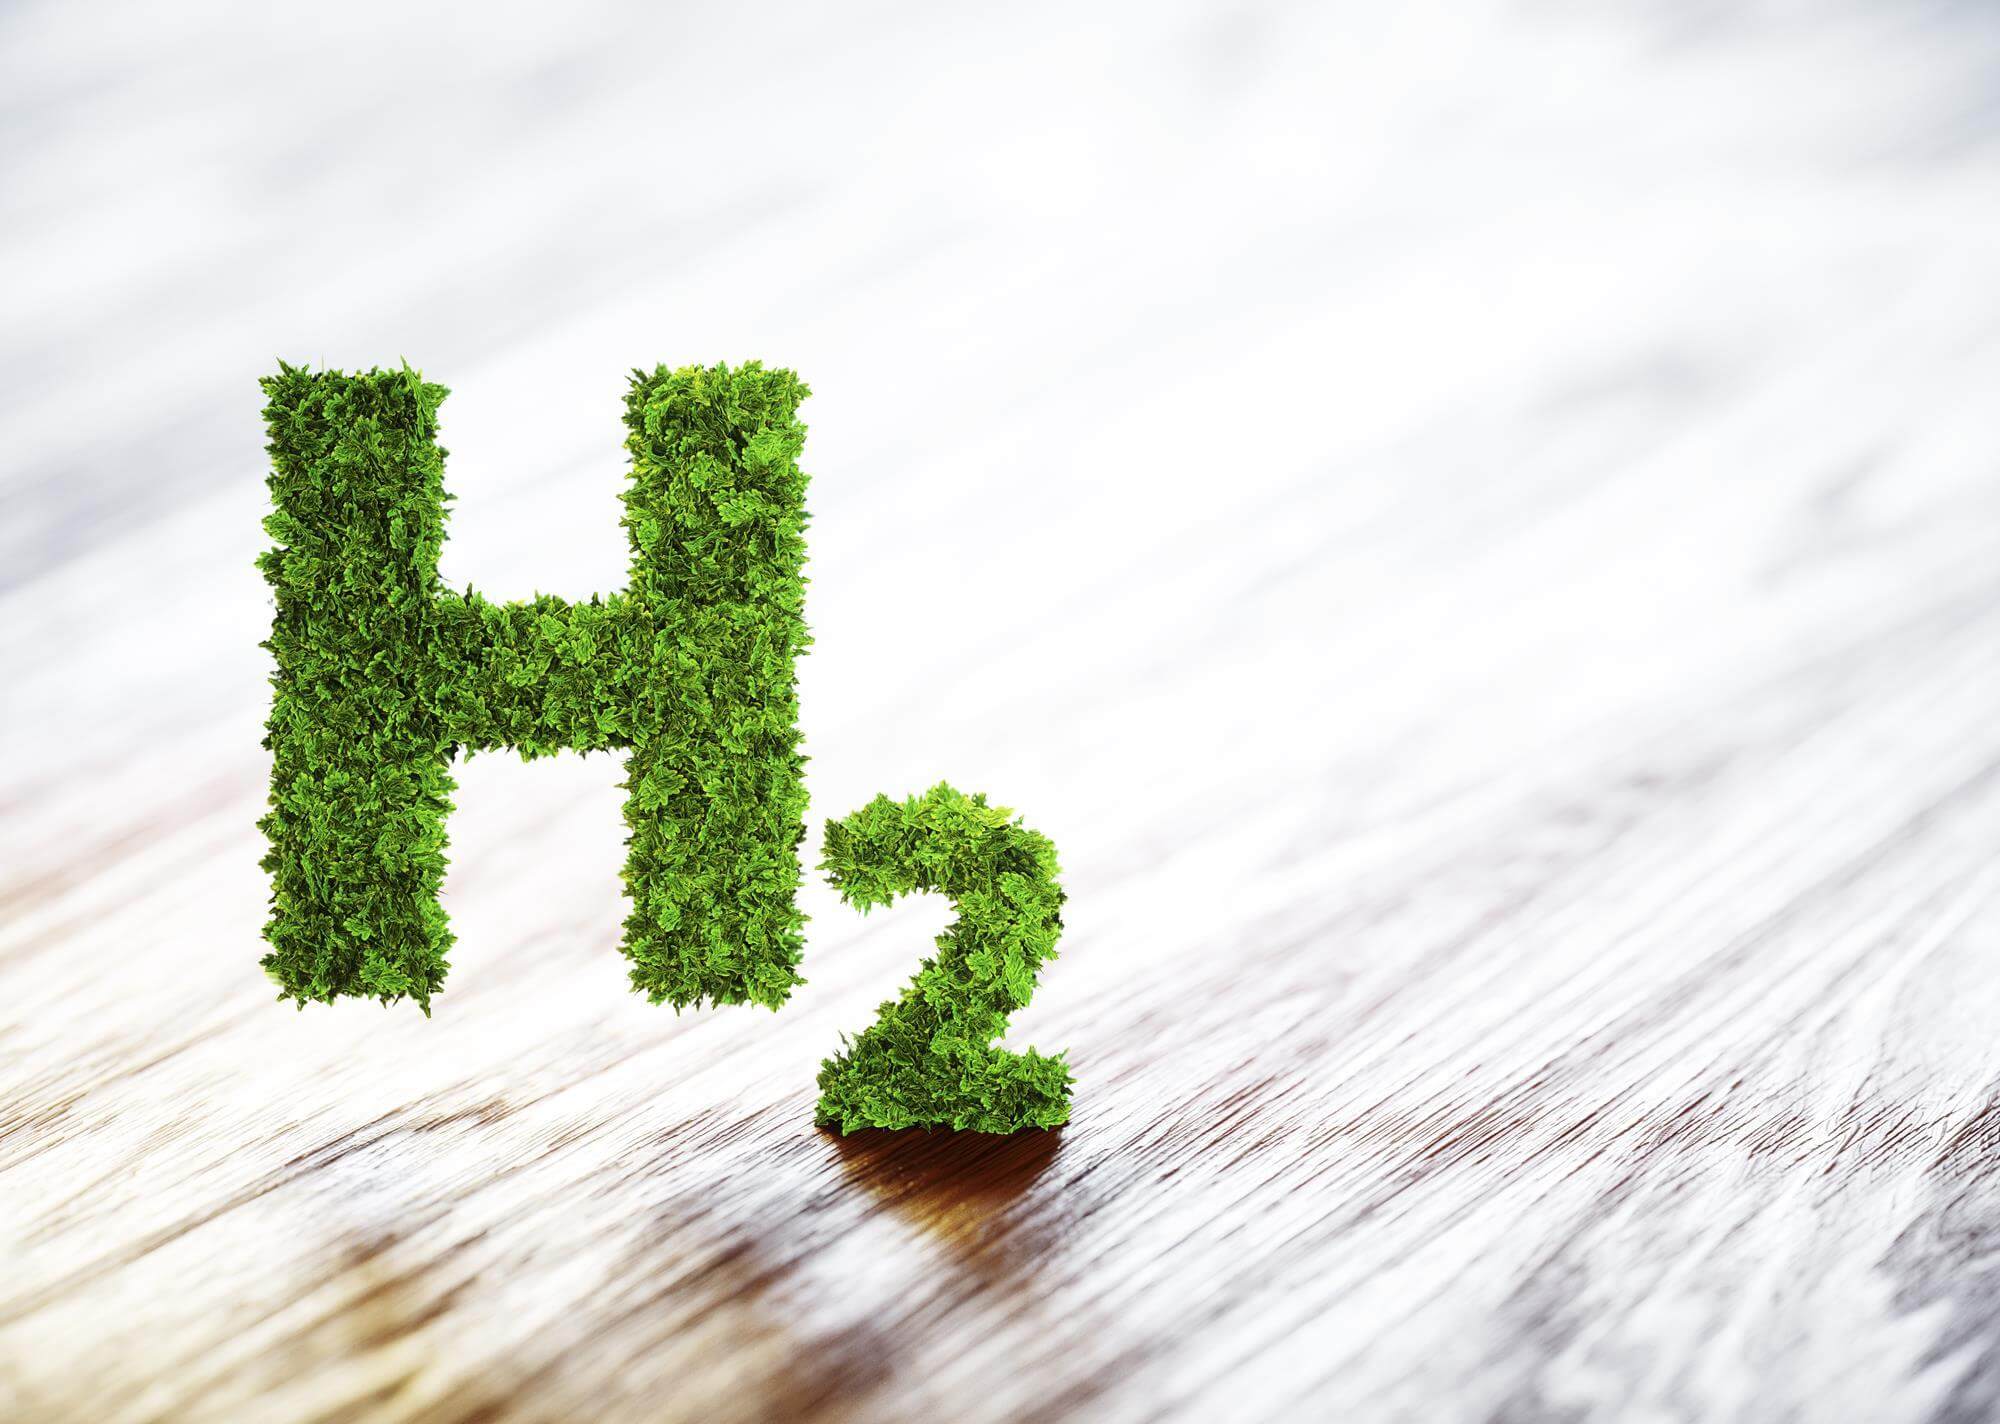 H2IL: A new way of generating energy